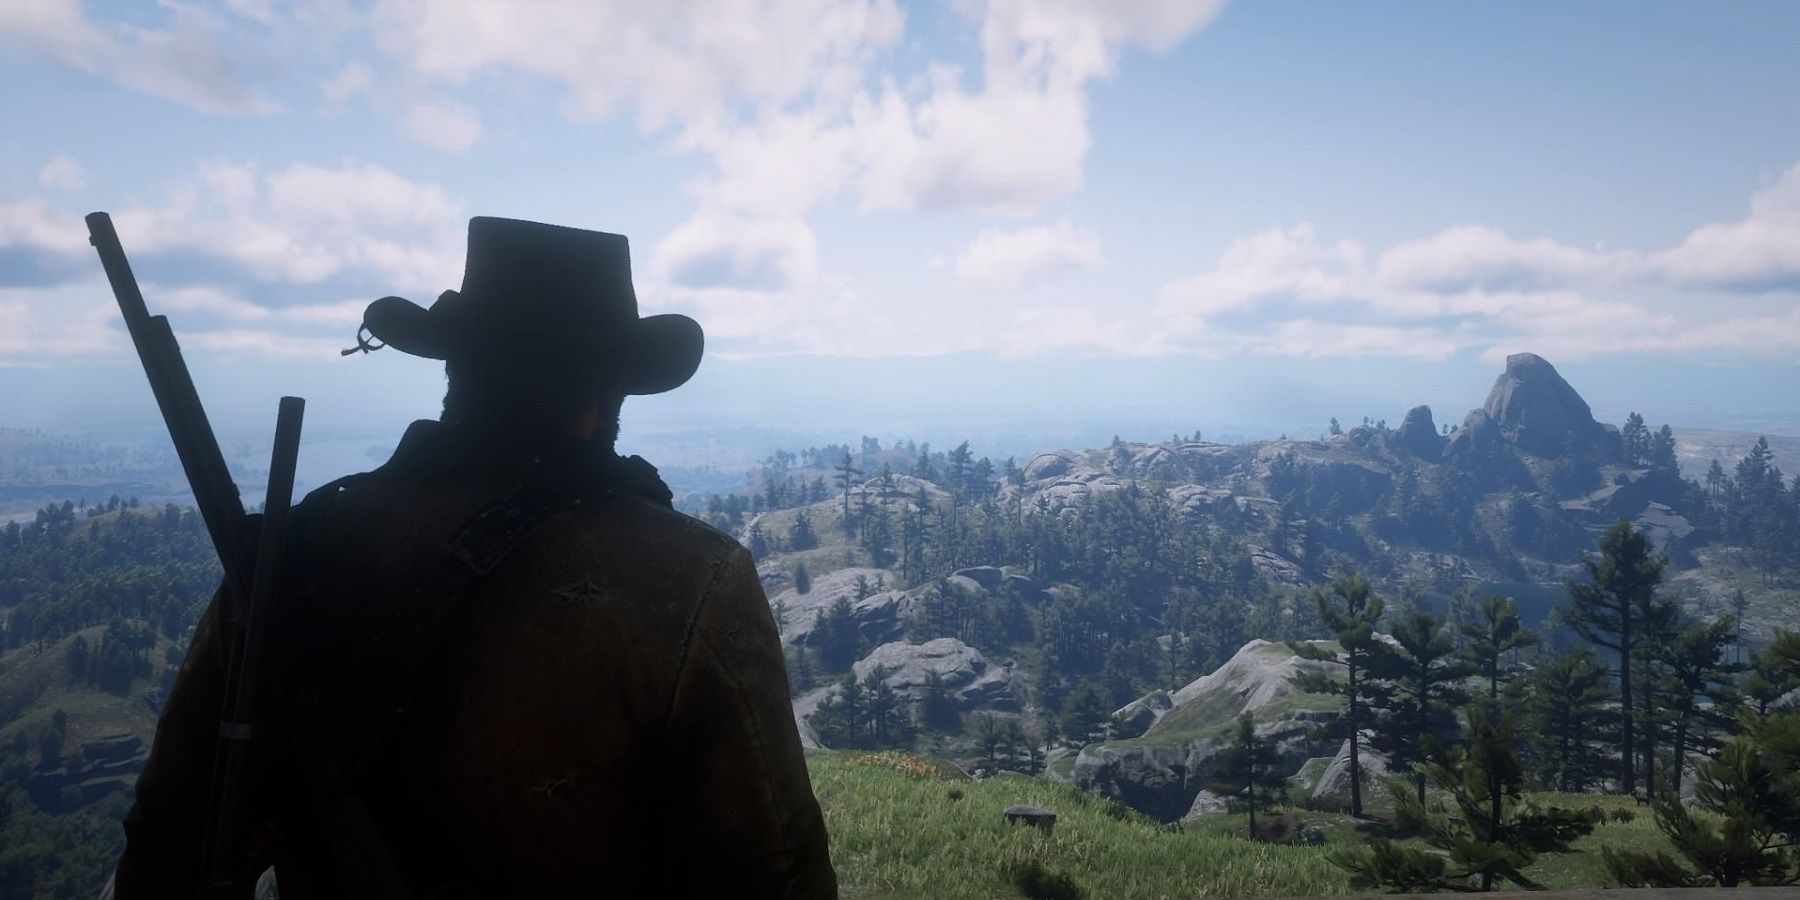 A player shares images comparing Red Dead Redemption 2 locales to their real-world counterparts.